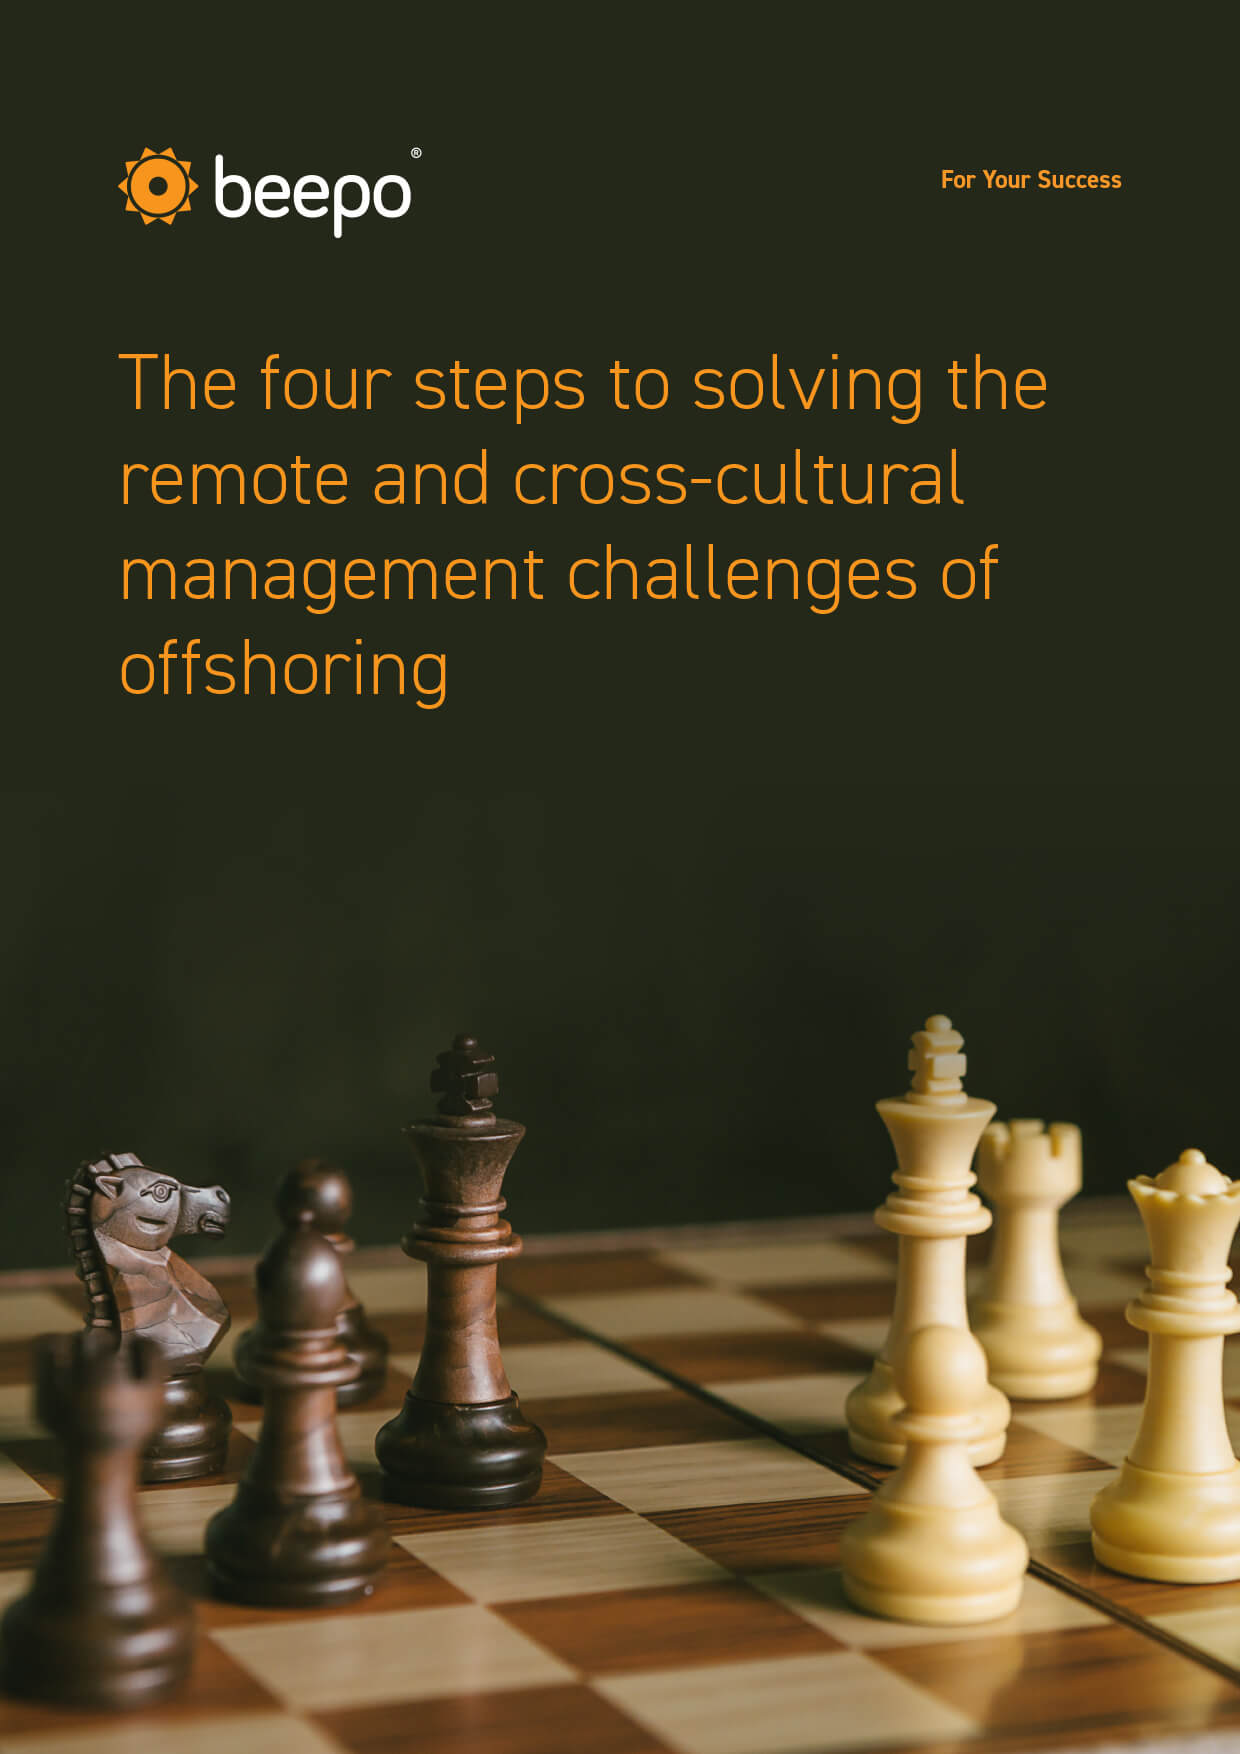 The four steps to solving the remote and cross-cultural management challenges of offshoring